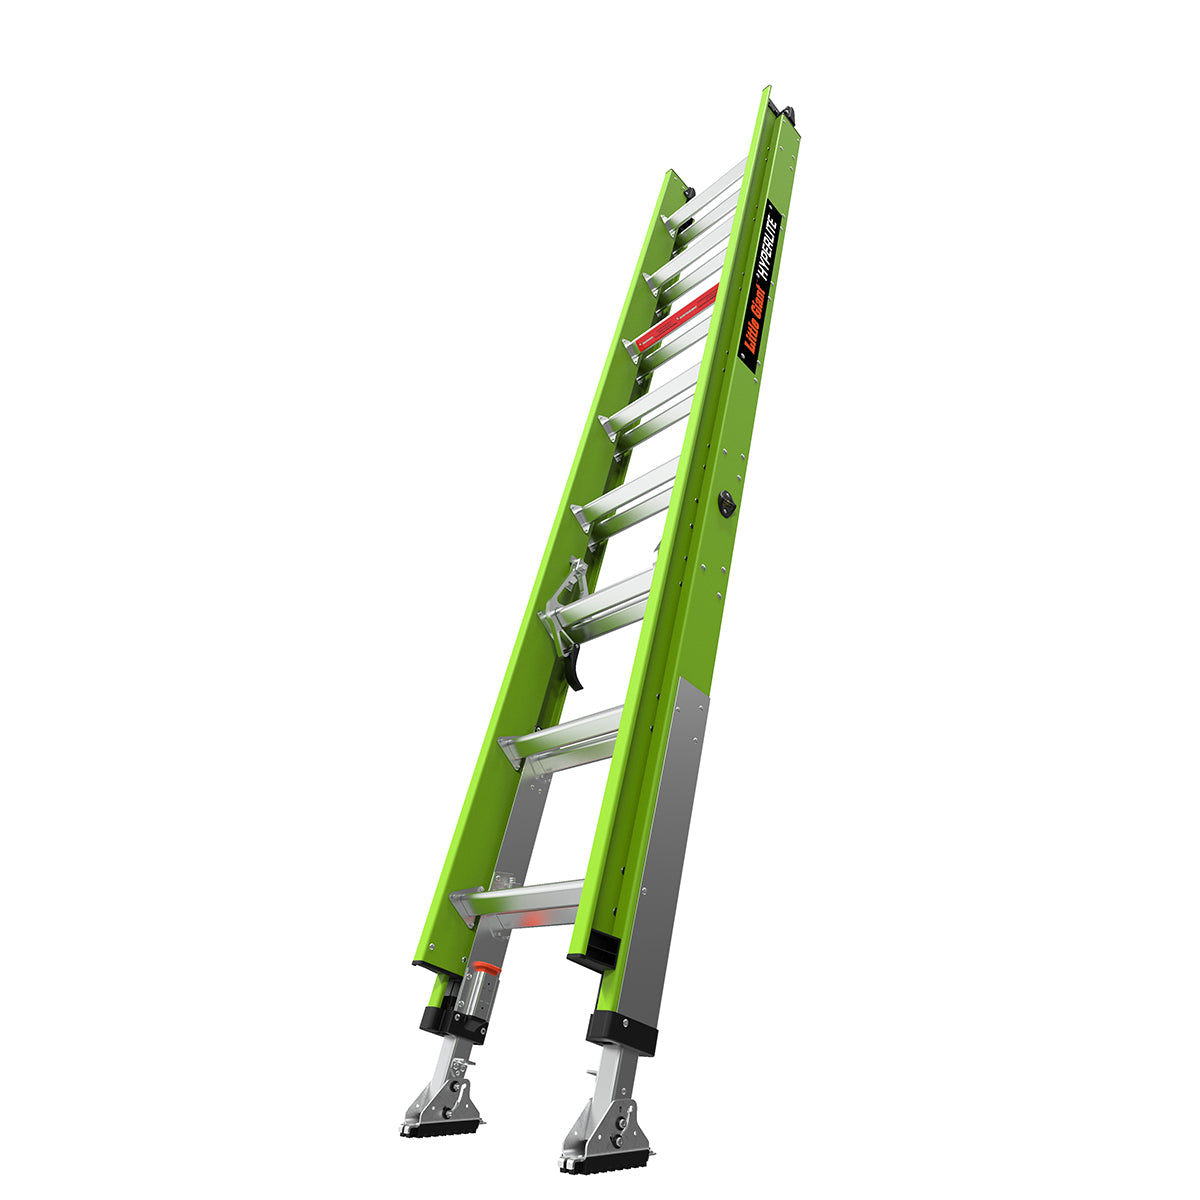 Little Giant 17916-303- HYPERLITE, 16' - CSA Grade IAA - 375 lb/170 kg Rated, Fiberglass Extension Ladder with GROUND CUE, Rub Strips, and SURE-SET Feet